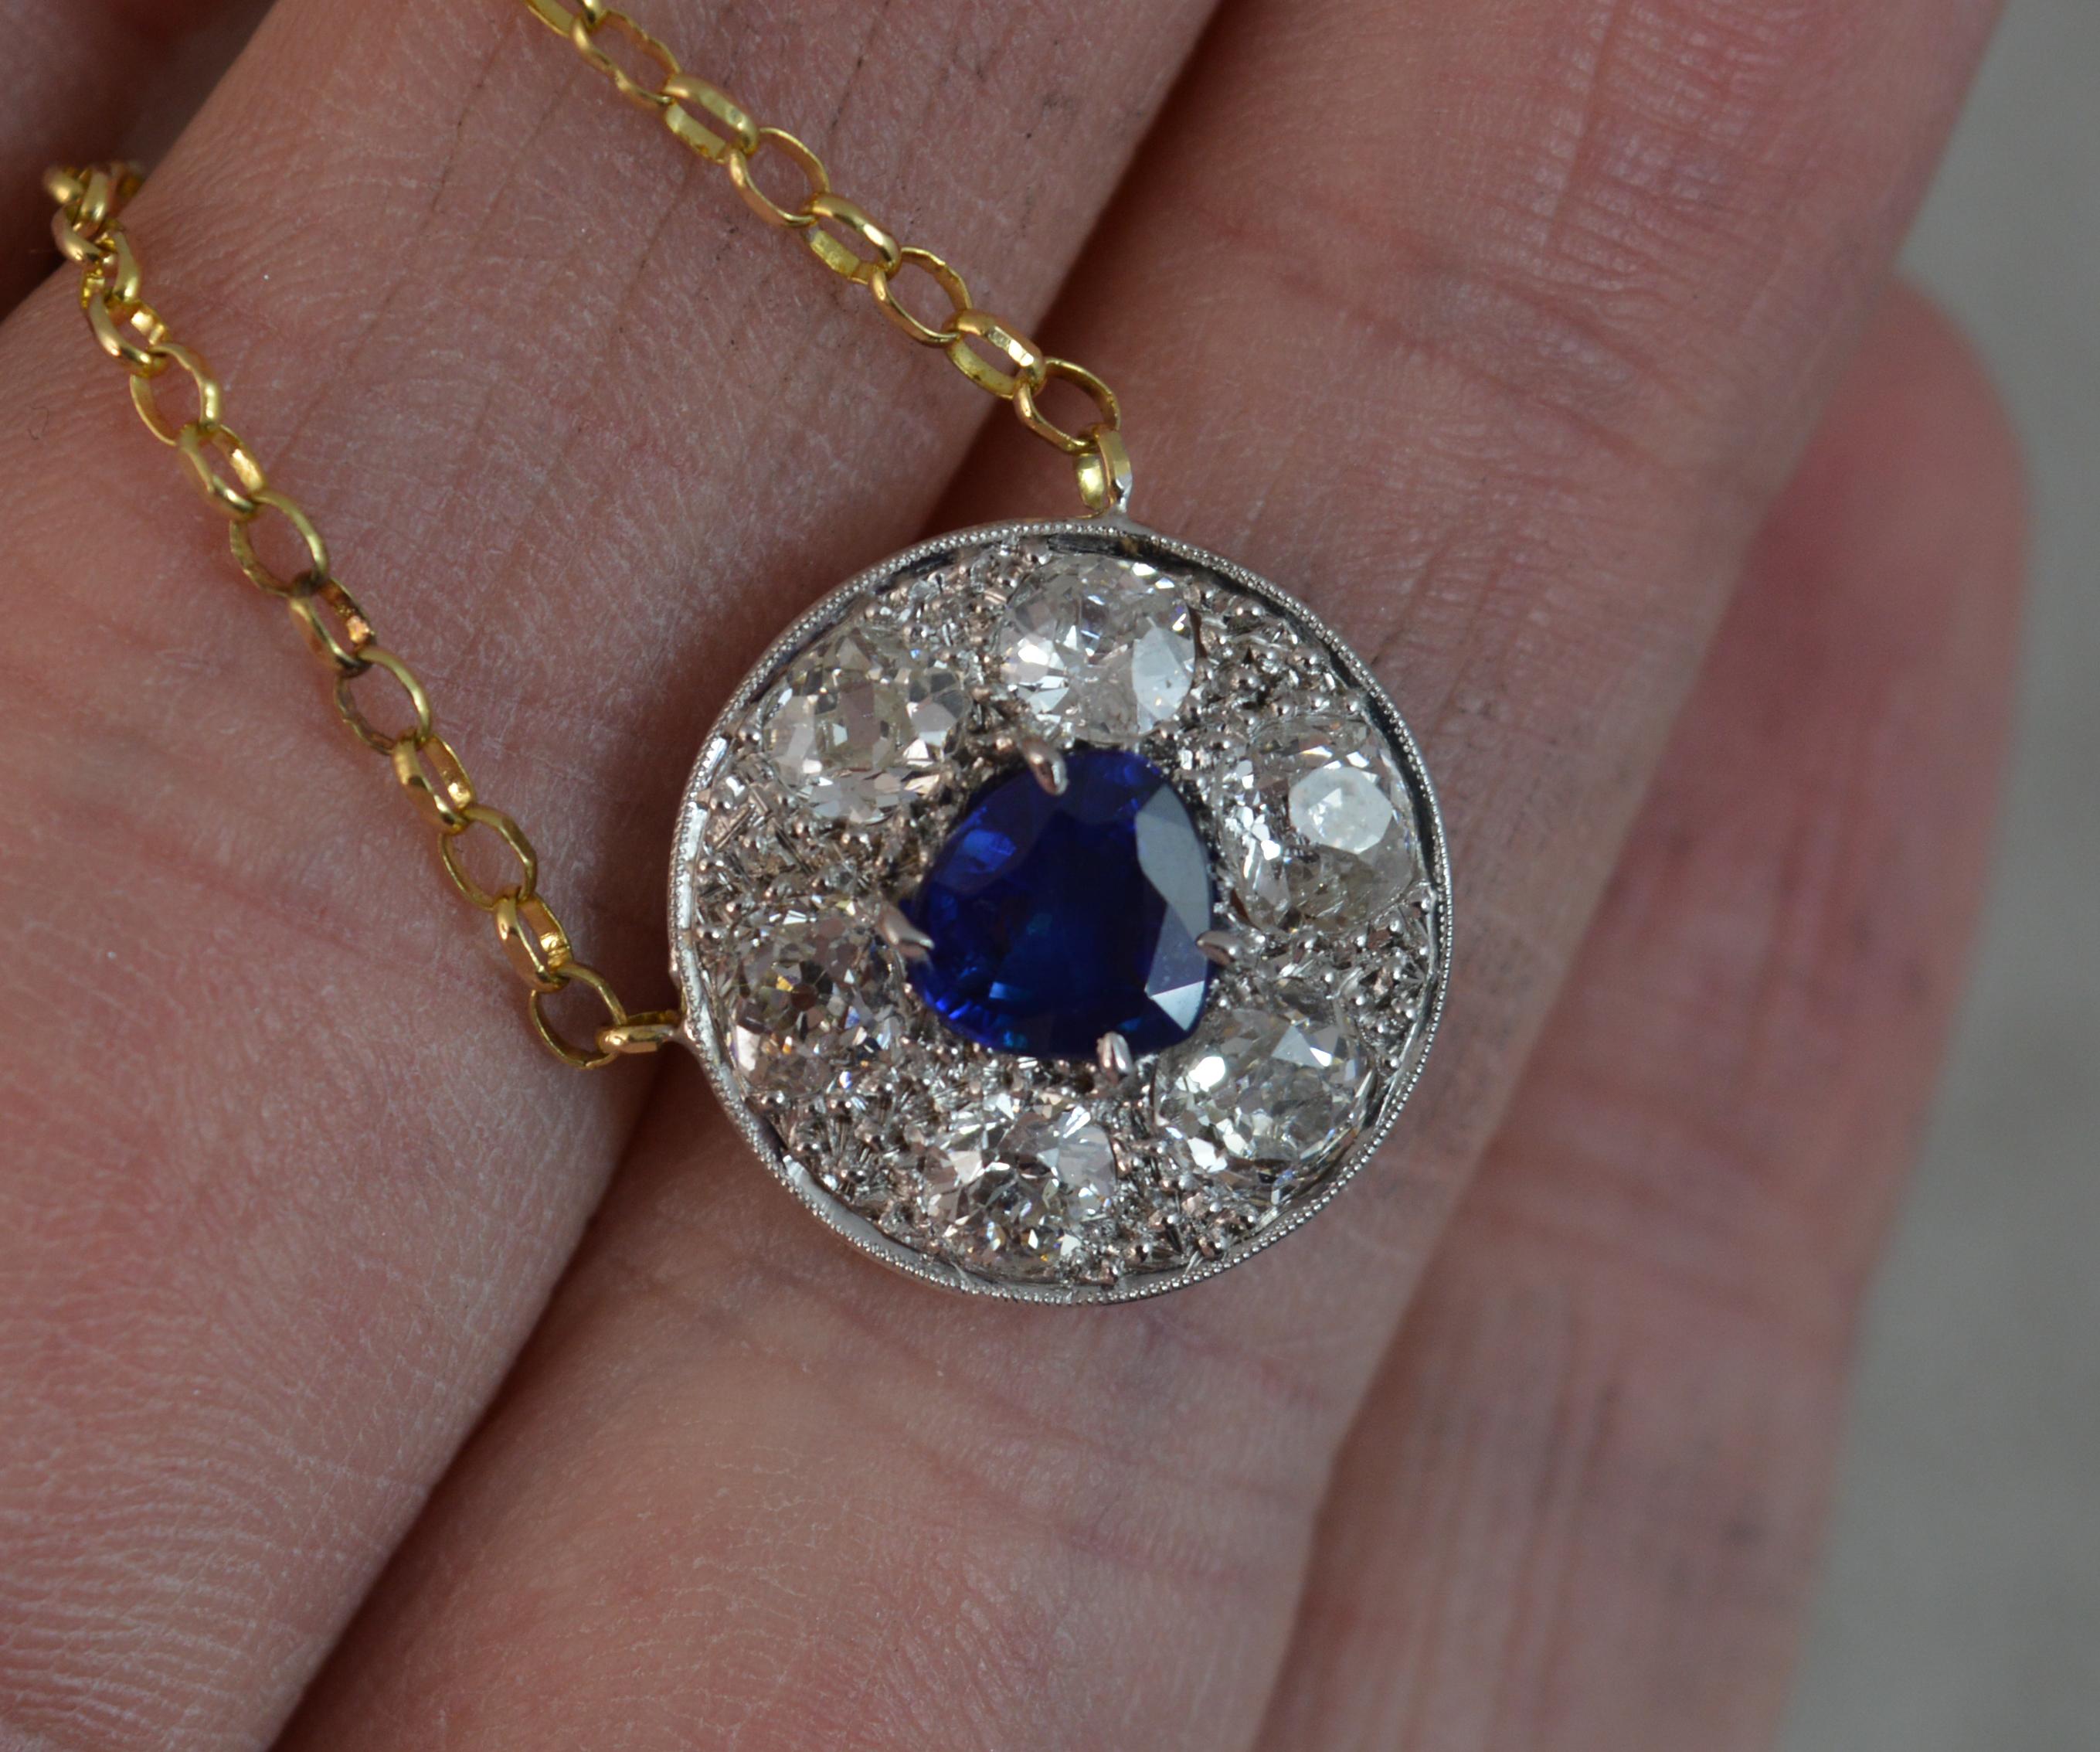 A fantastic antique pendant necklace.
Stylishly shaped with circular cluster pendant. Set with a cushion trillion cut bright blue sapphire to centre with six old cut diamonds surrounding.
Total diamond weight approx 1.65 carats. Clean and